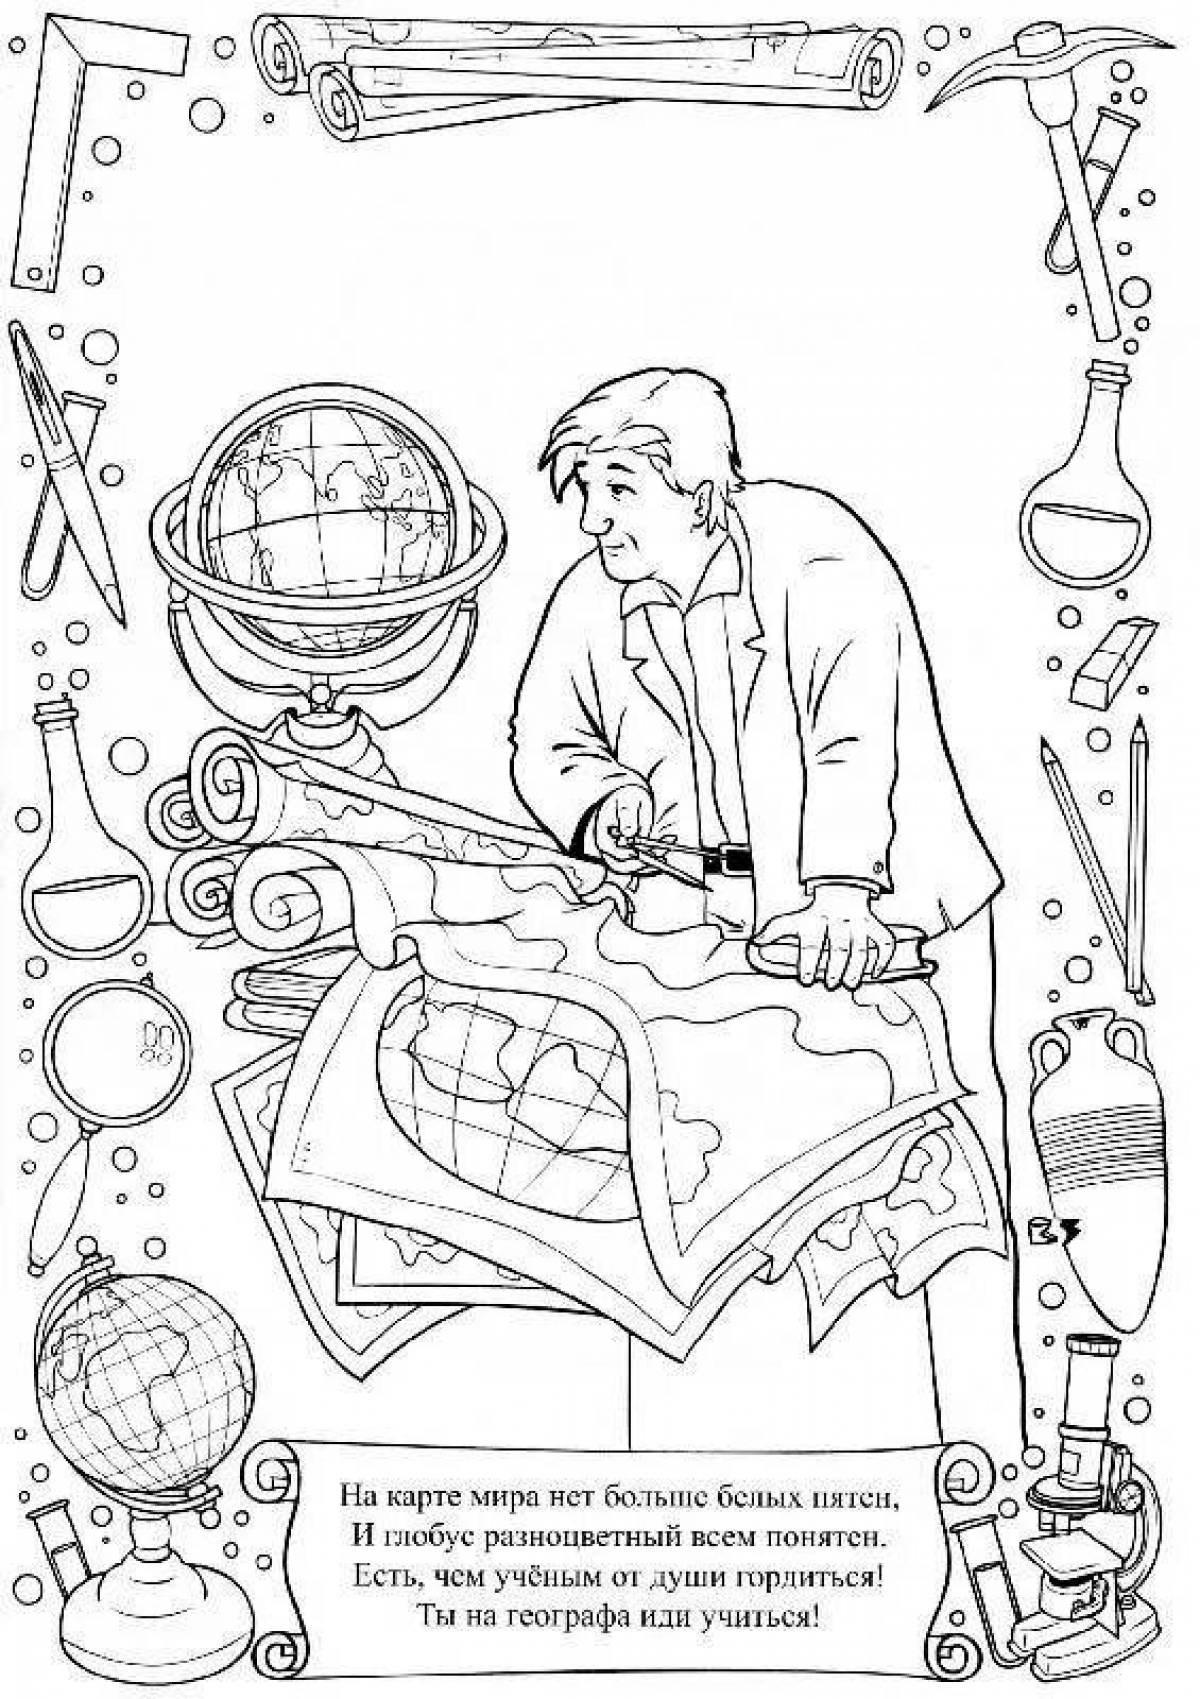 Interesting science coloring book